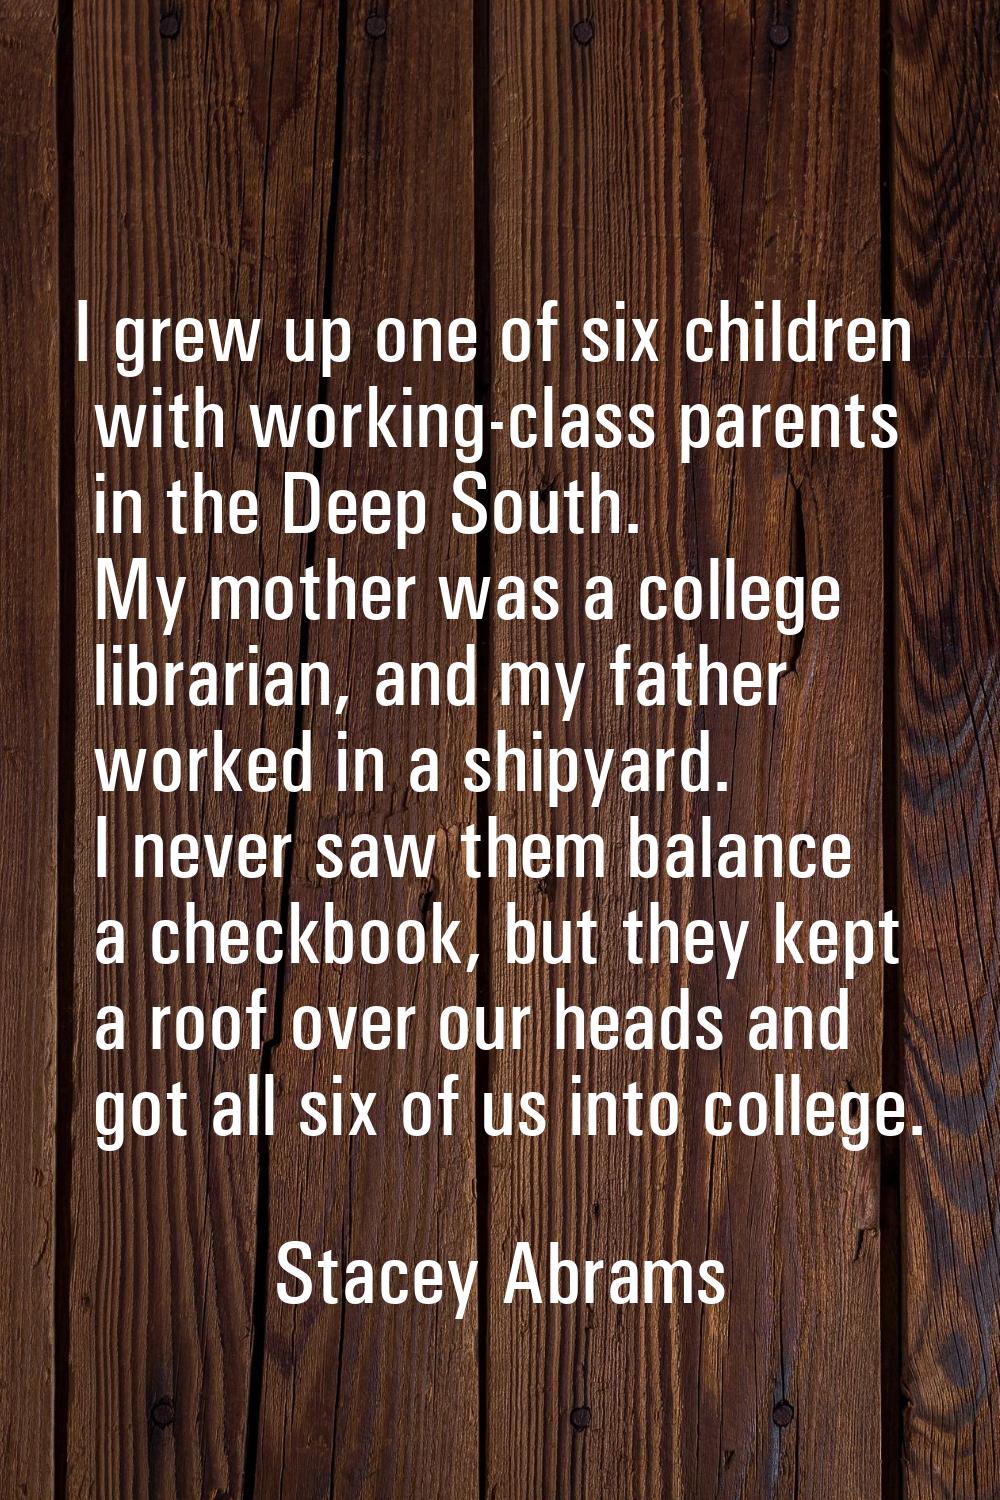 I grew up one of six children with working-class parents in the Deep South. My mother was a college